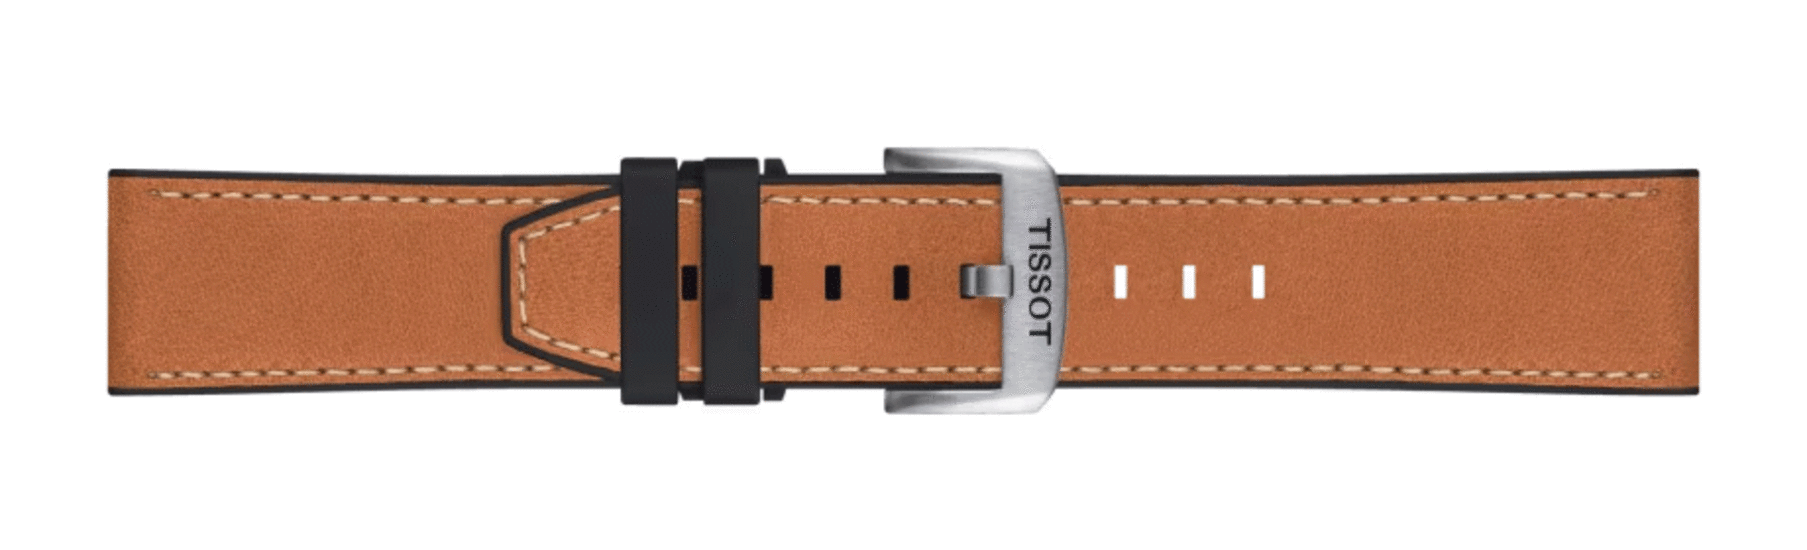 Tissot official brown leather strap lugs 20 mm